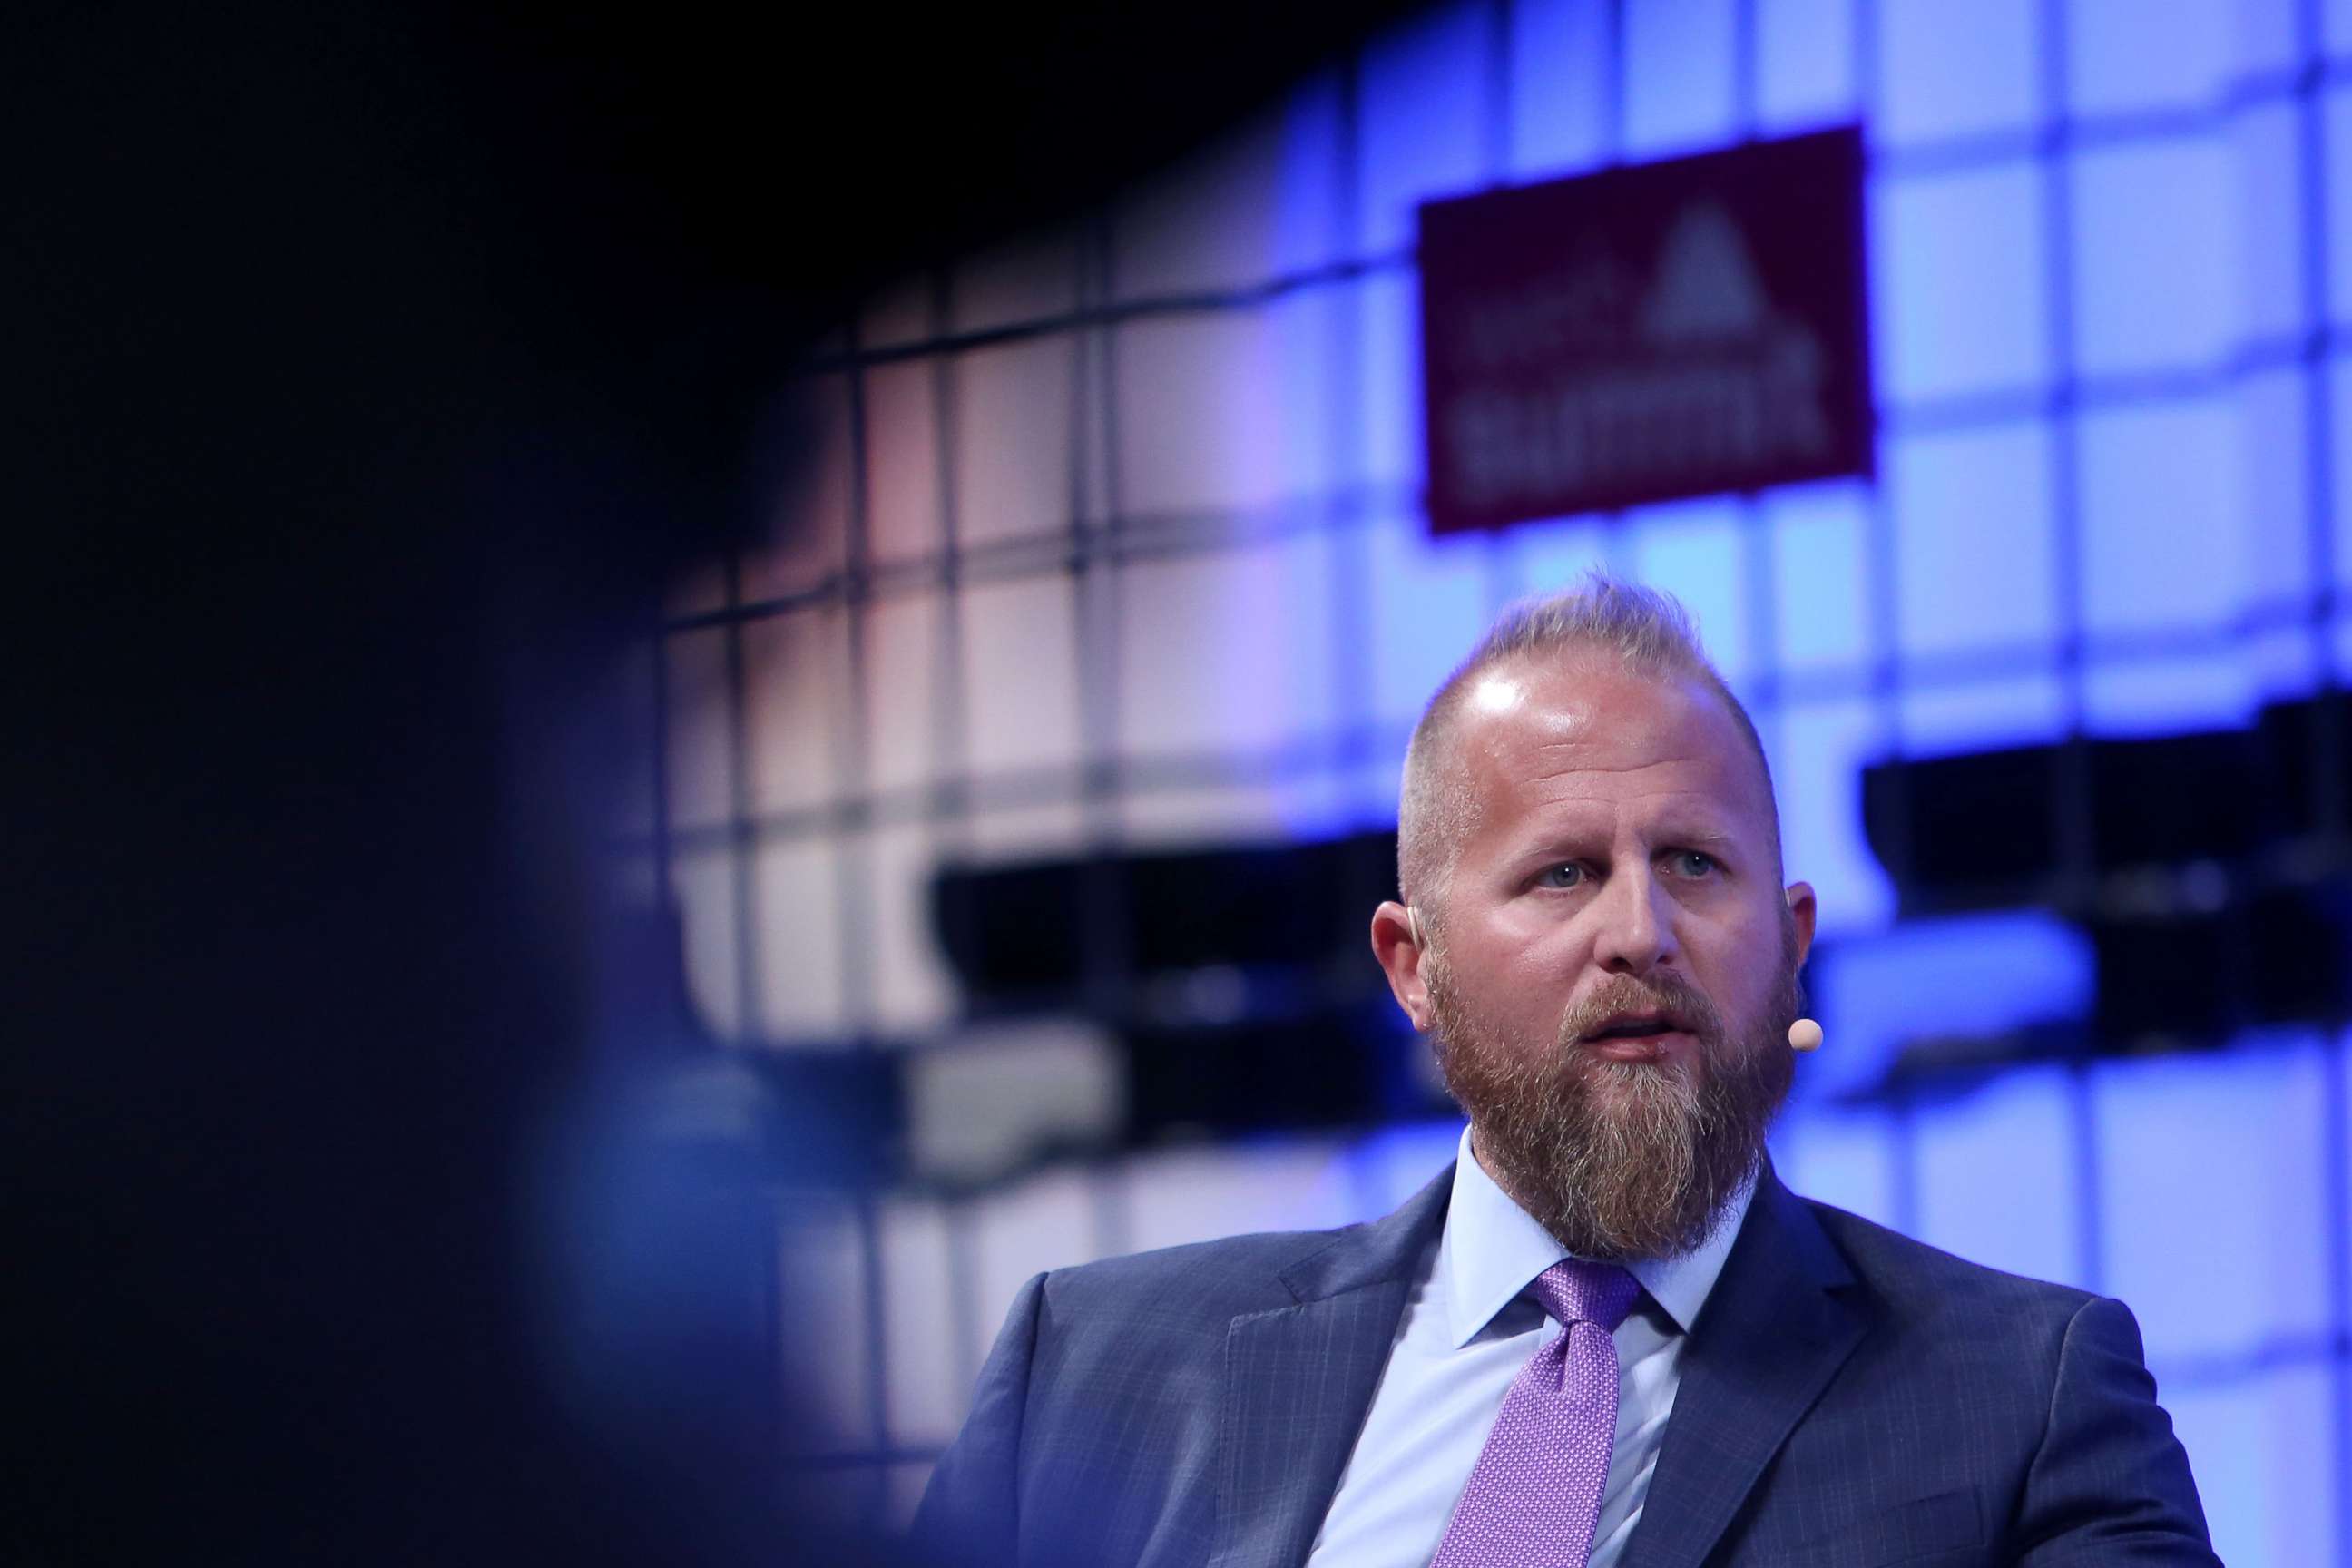 PHOTO: Brad Parscale, Digital Director of the Donald J. Trump Presidential Campaign, speaks at an event in Lisbon, Portugal, Nov. 8, 2017.